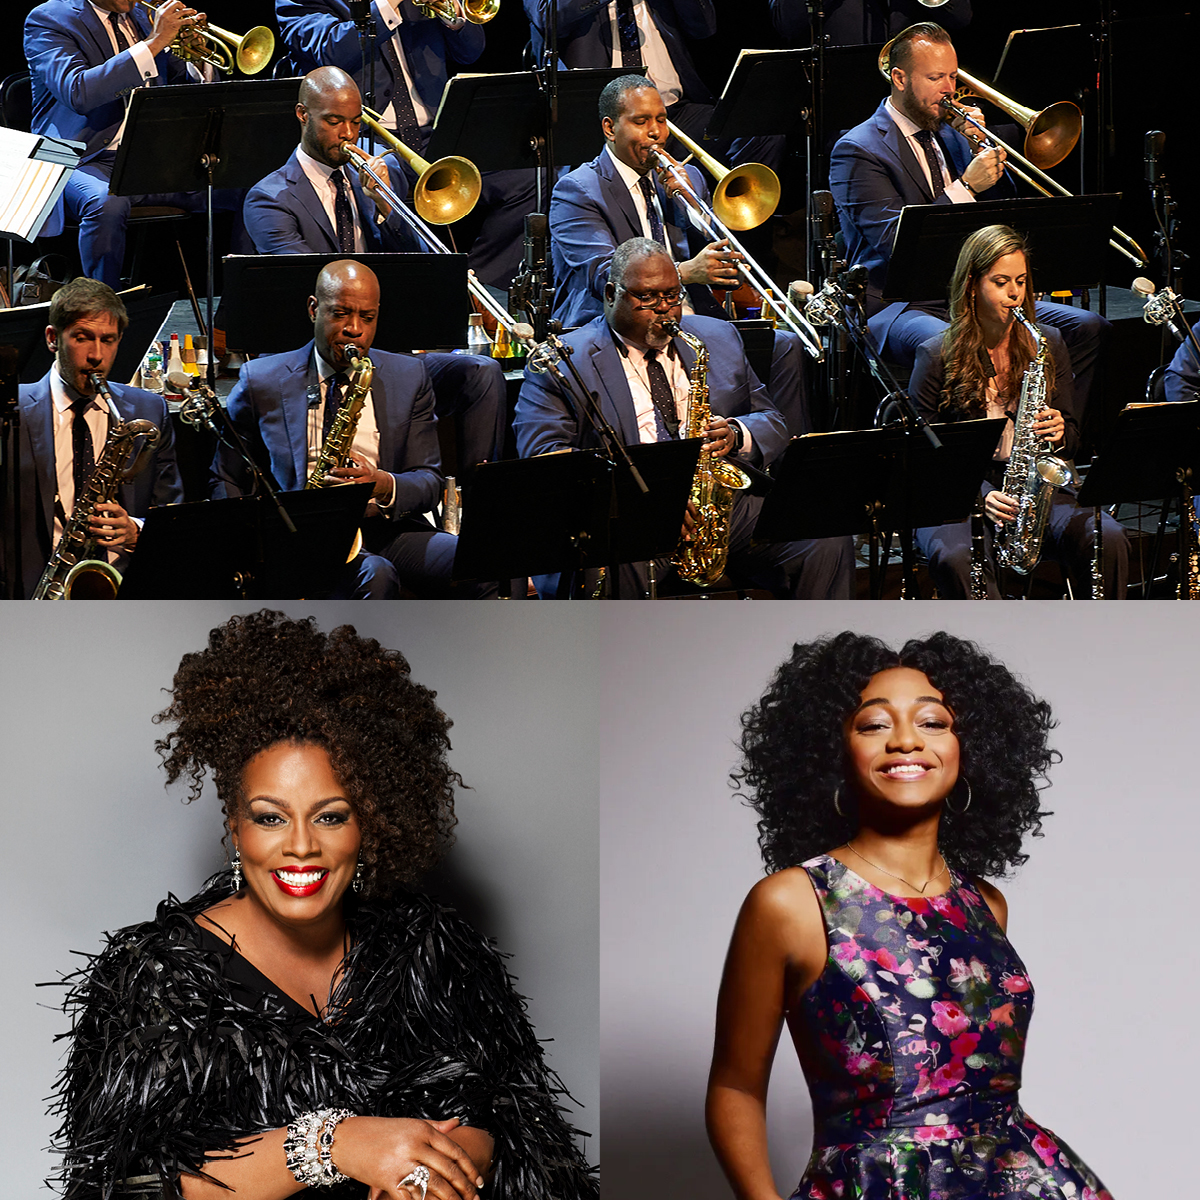 Image for Big Band Holidays  Jazz at Lincoln Center Orchestra  featuring Dianne Reeves  with Samara Joy